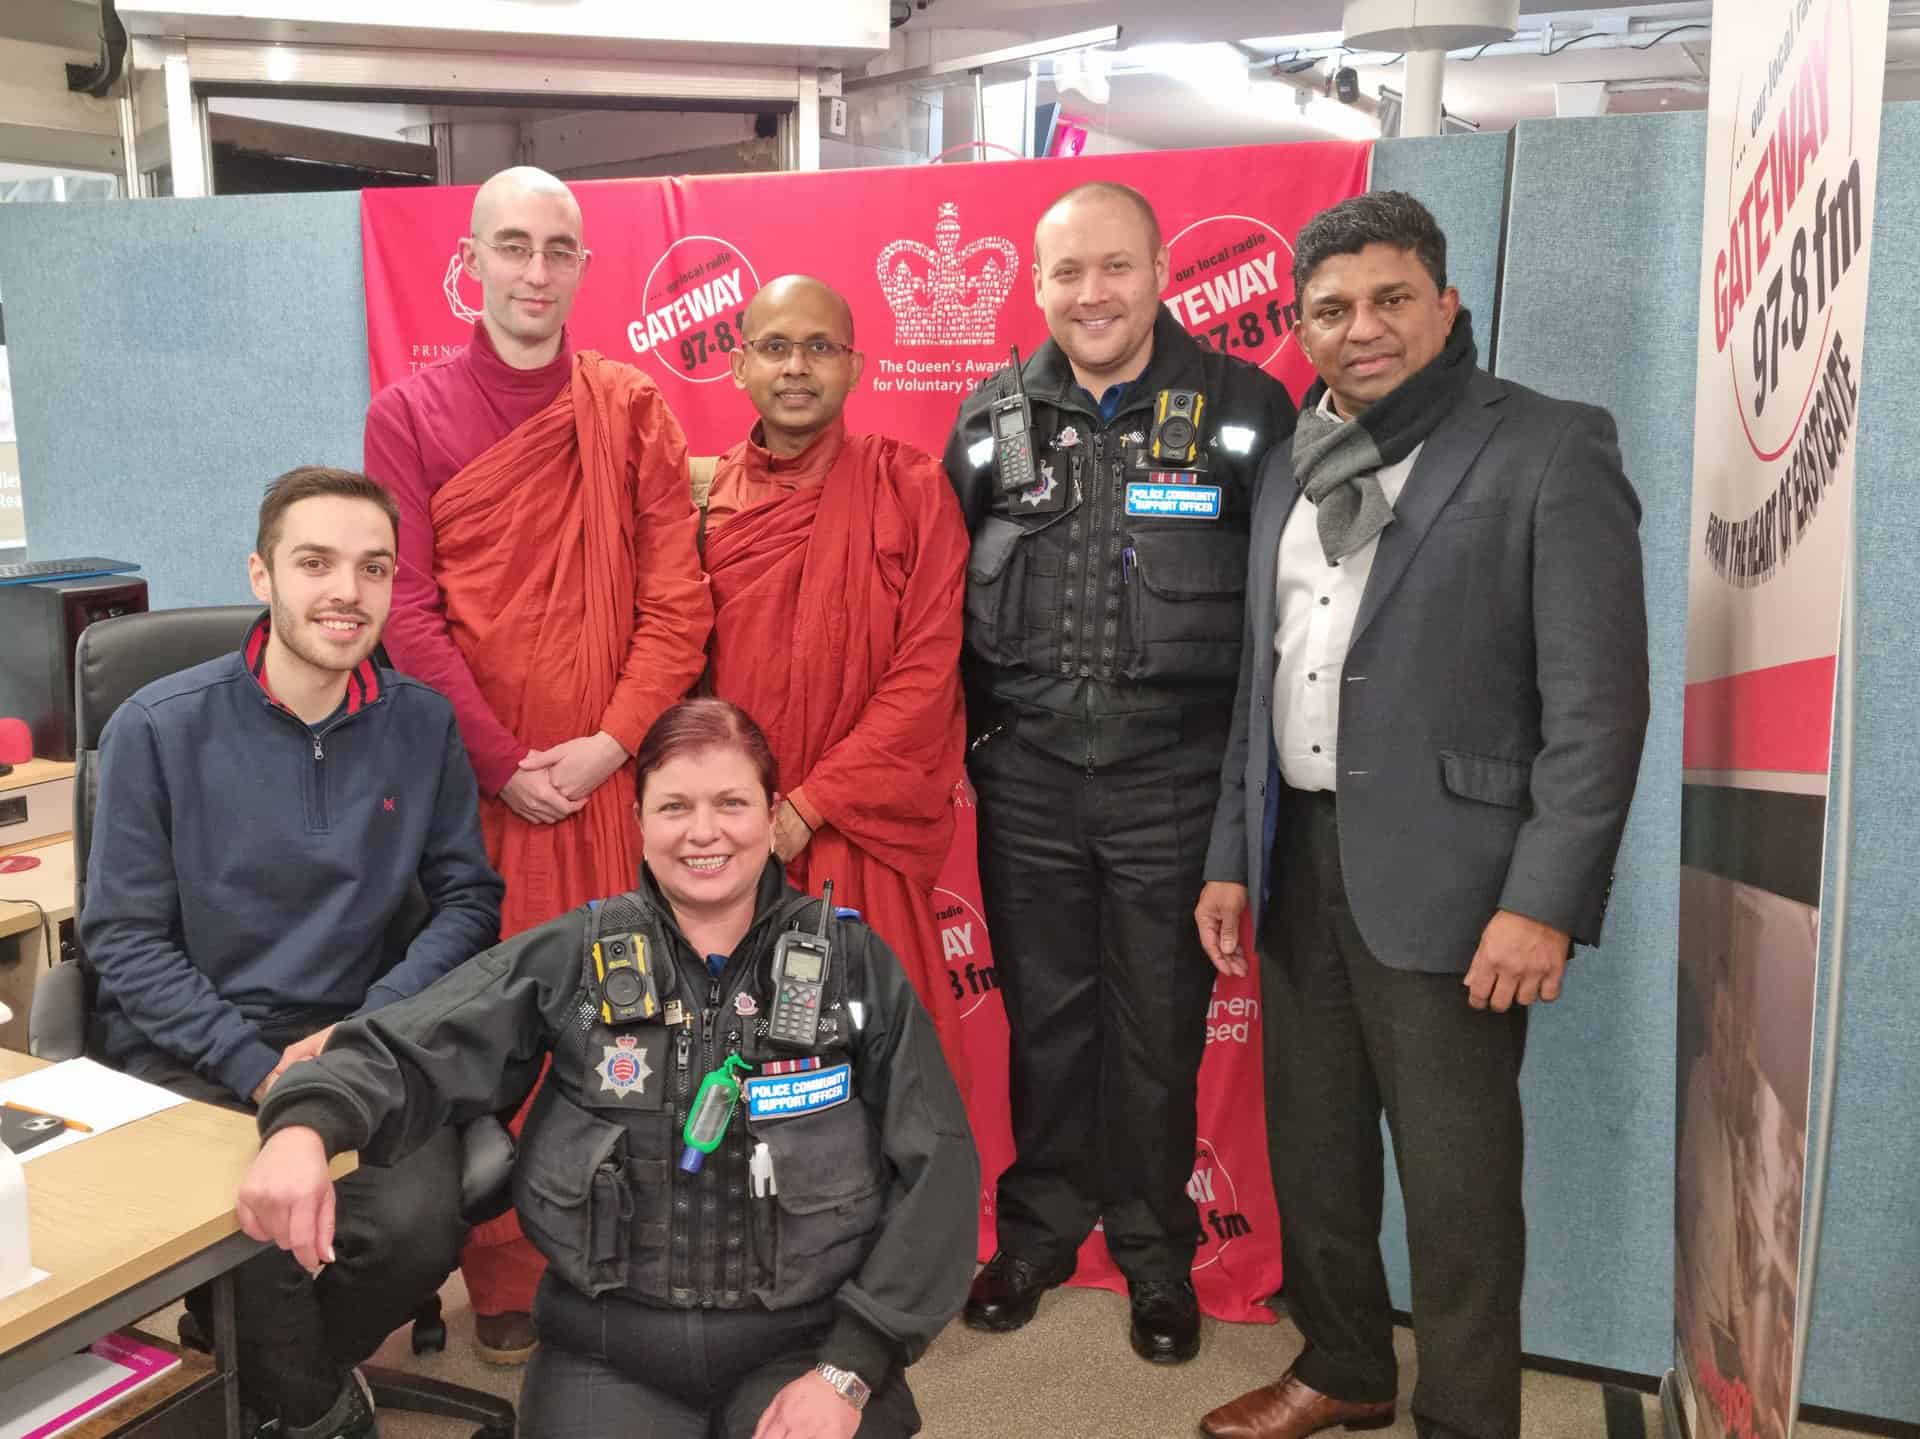 February visit from the Dhamma Land Buddhist monks